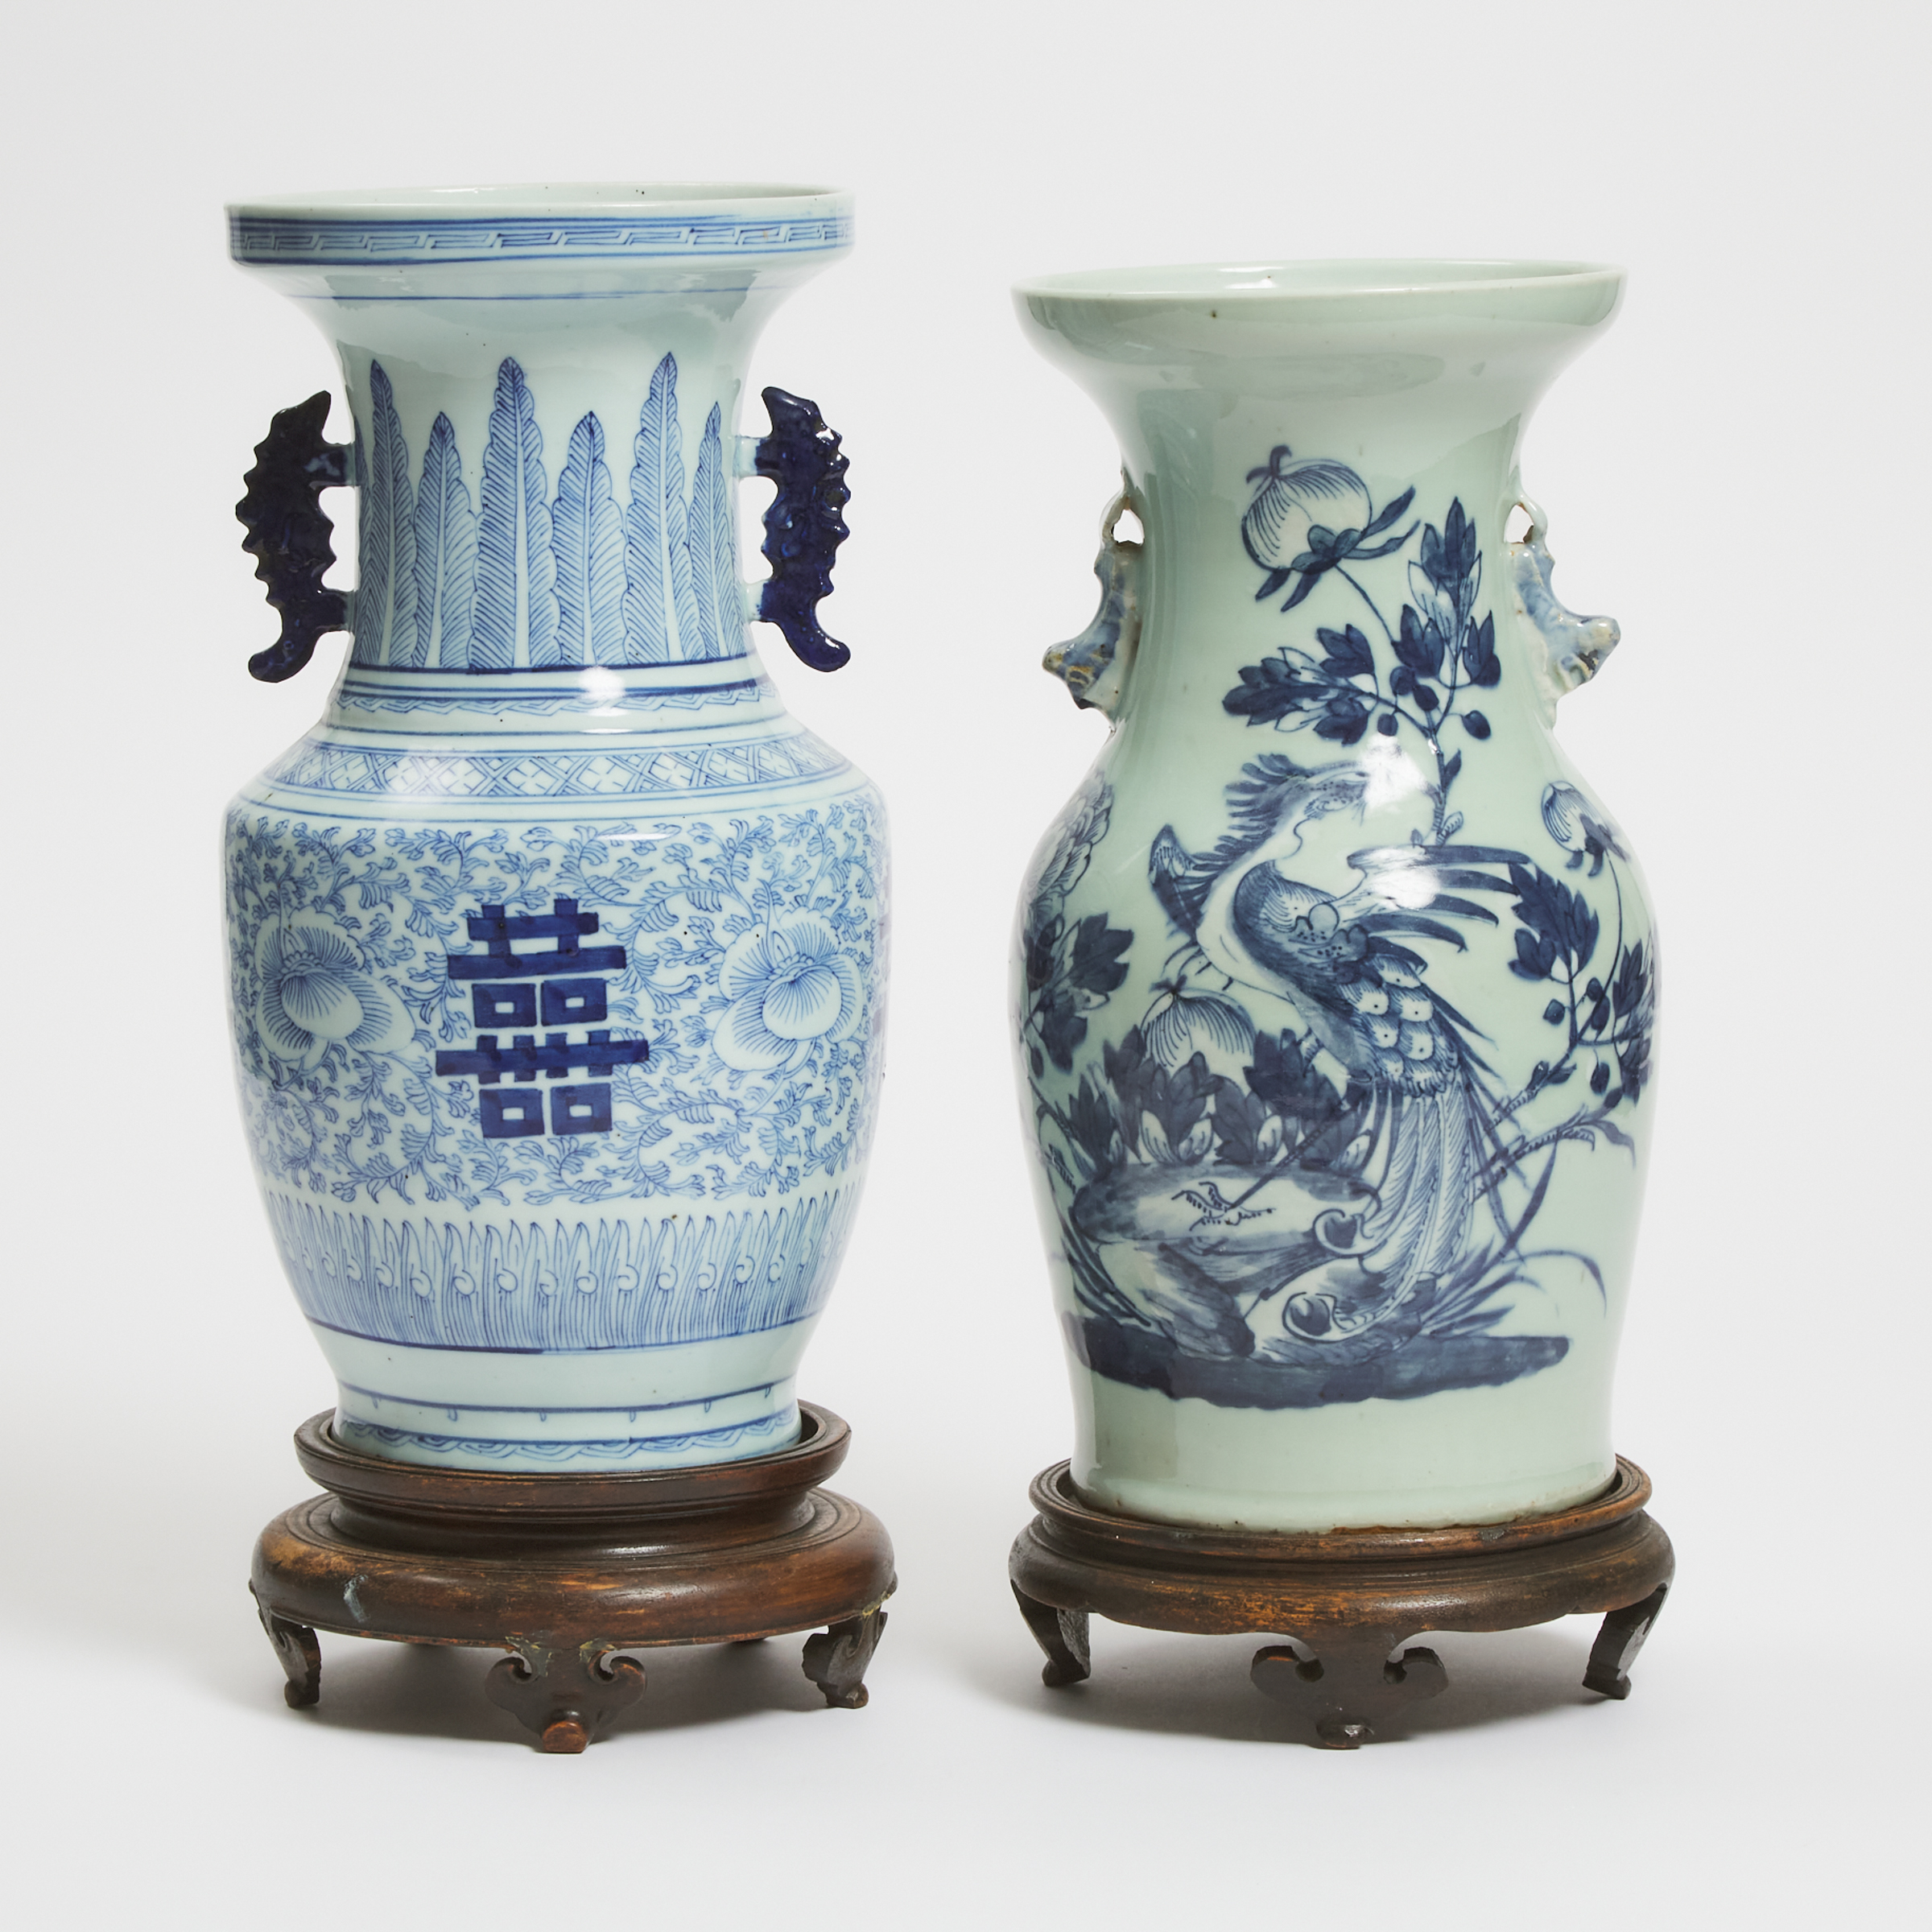 A Blue and White 'Double Happiness' Vase, Together With a Celadon-Ground Vase, 19th Century